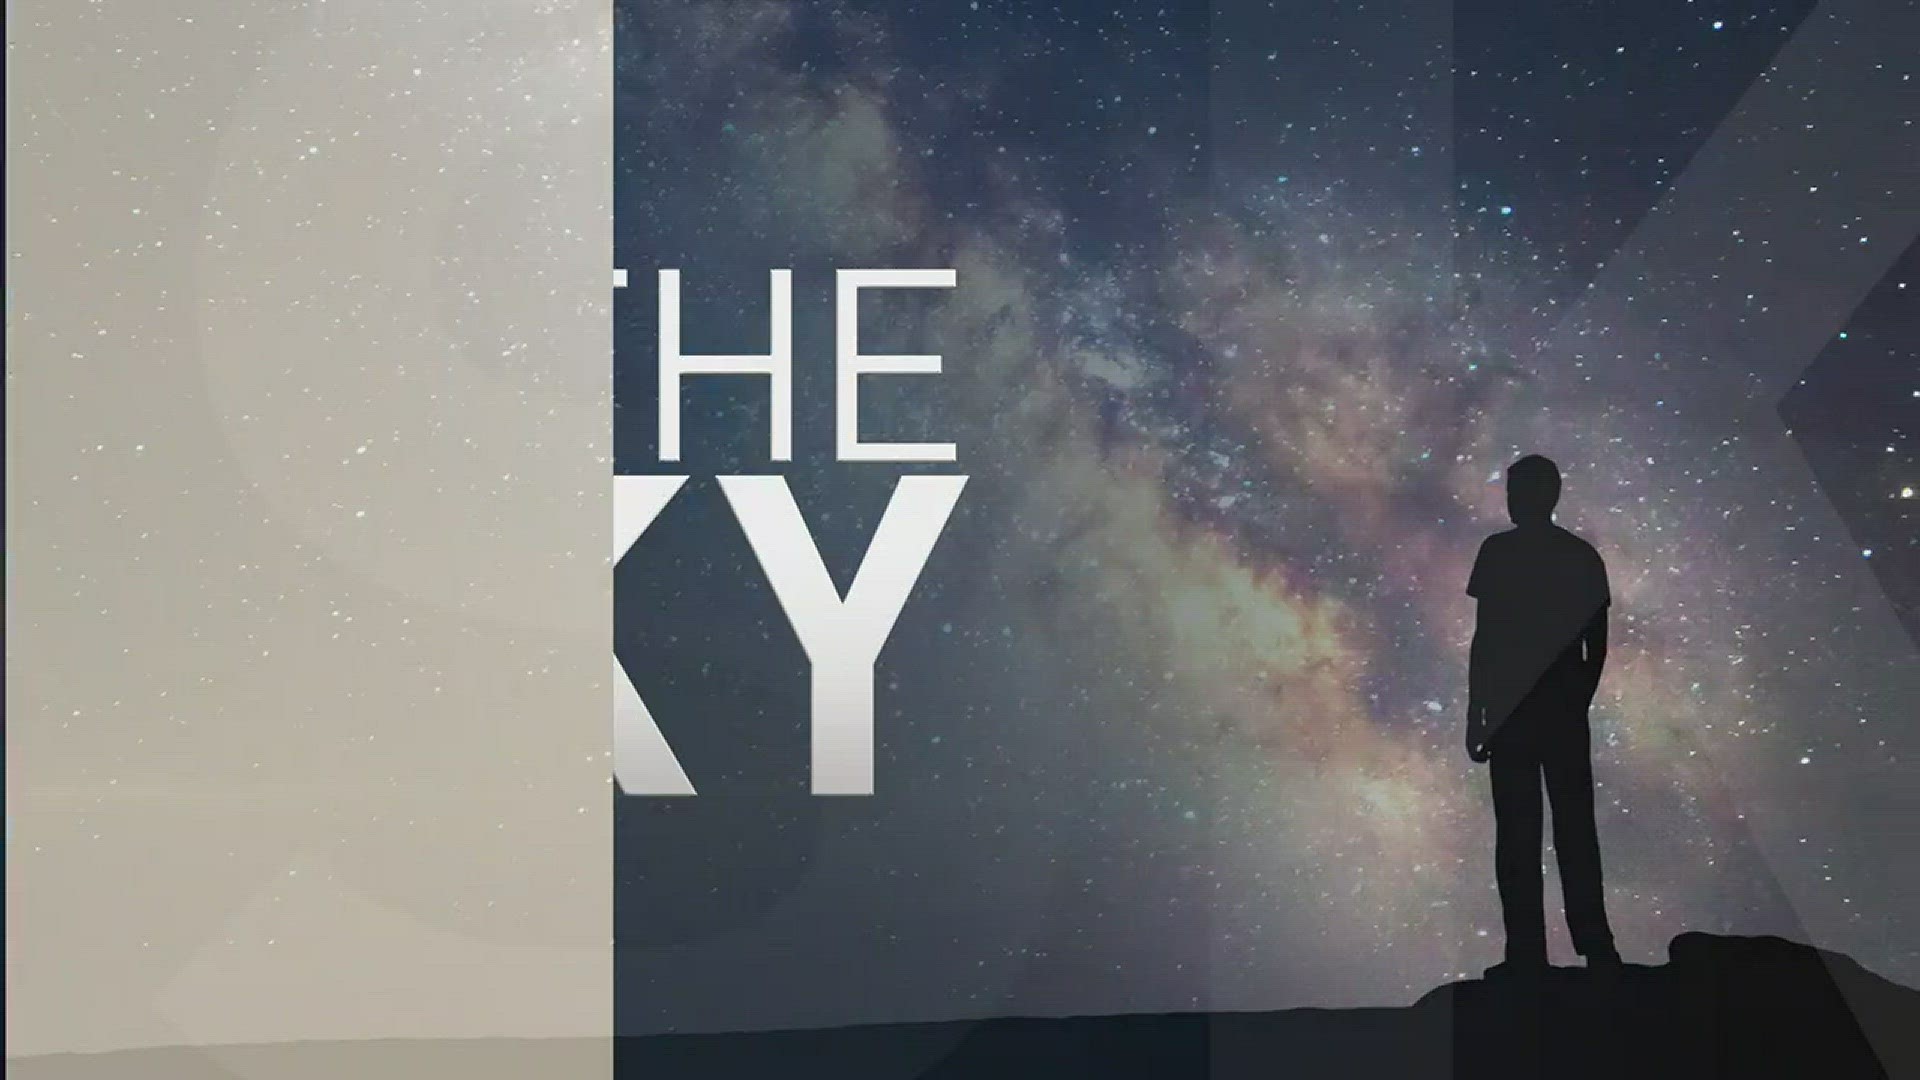 June is full of fun astronomy activities. See what you can participate in as part of "In the Sky" from Jay Reynolds and special guest host Gale Franko. #3weather